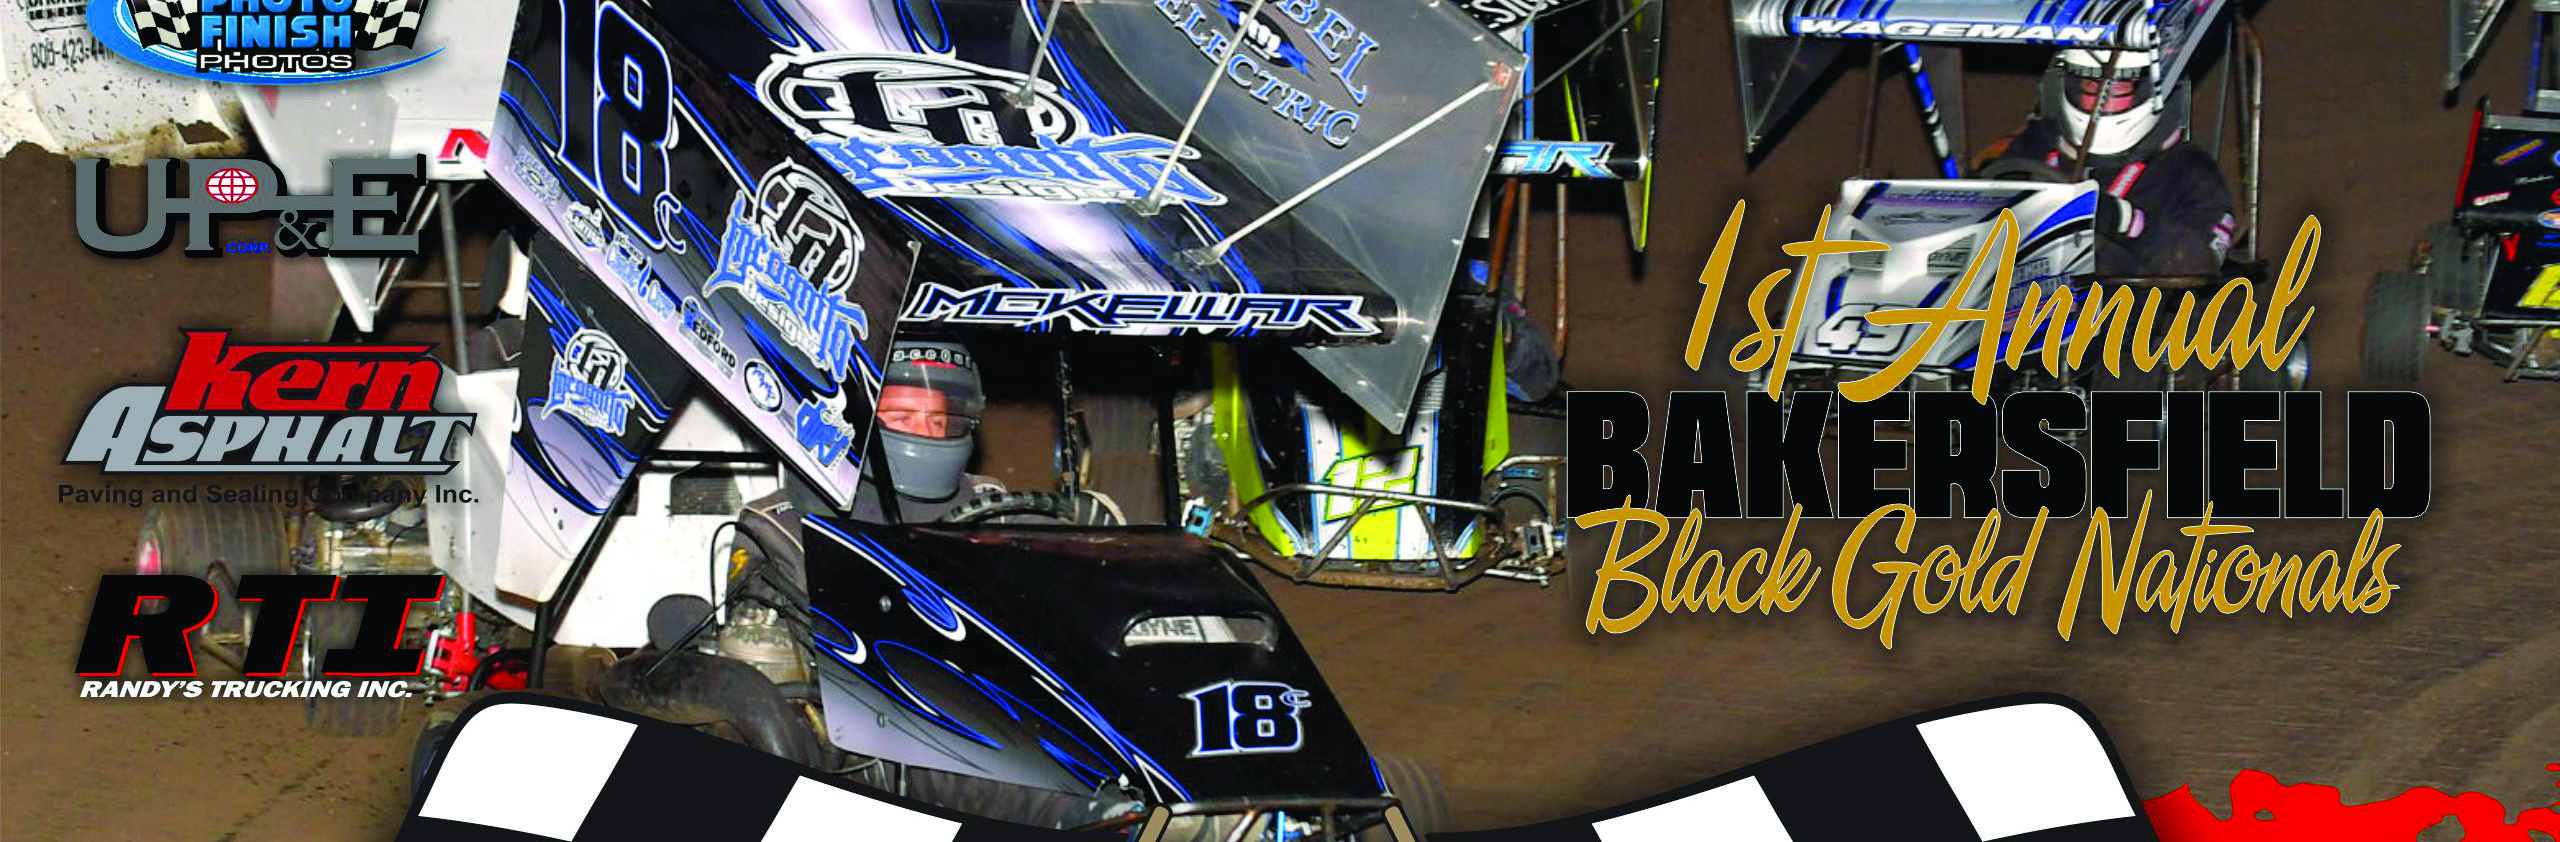 1st ANNUAL BAKERSFIELD BLACK GOLD NATIONALS